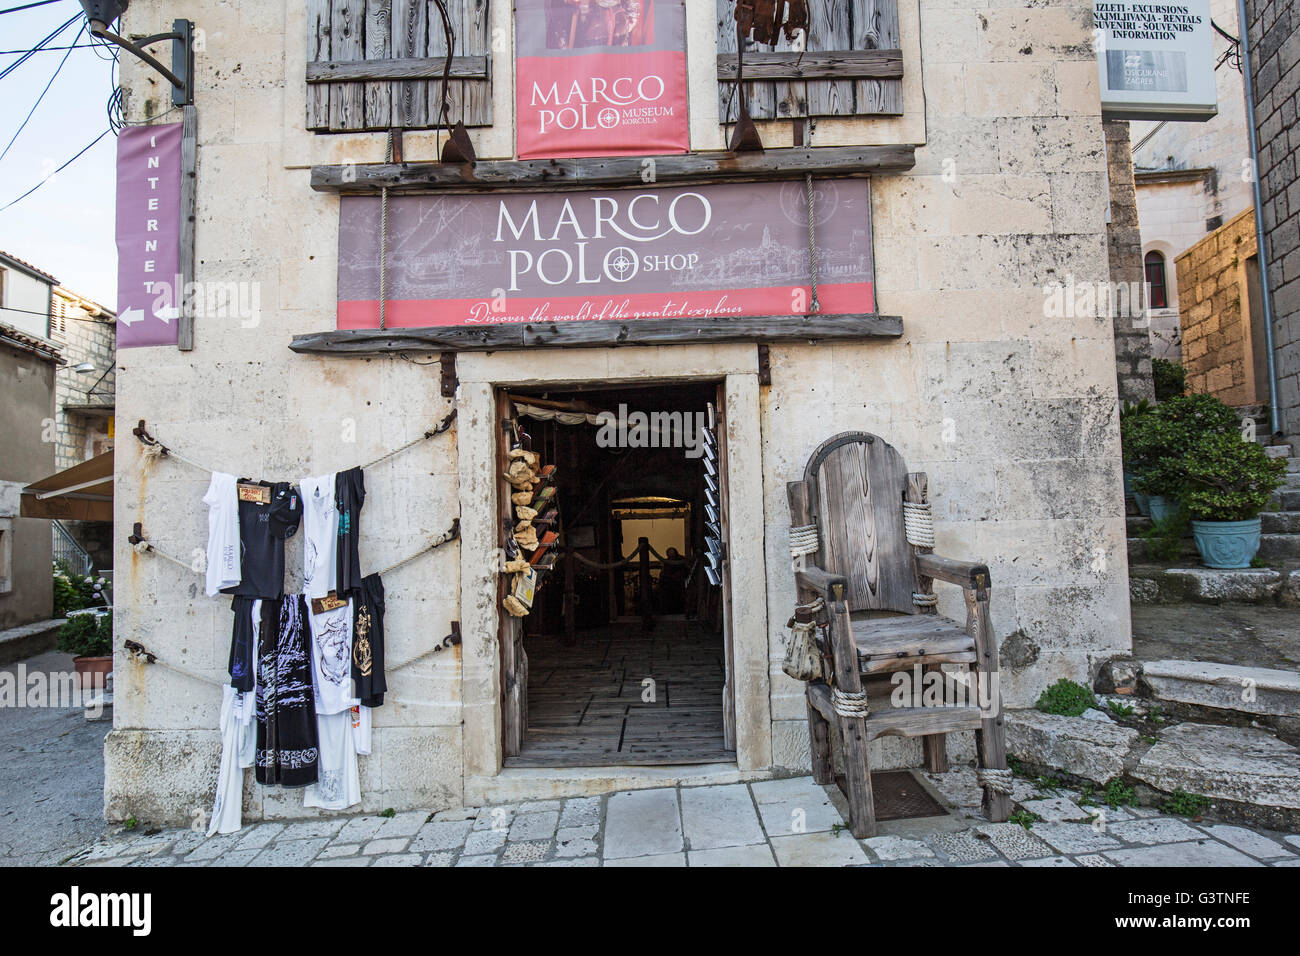 Marco polo shop hi-res stock photography and images - Alamy